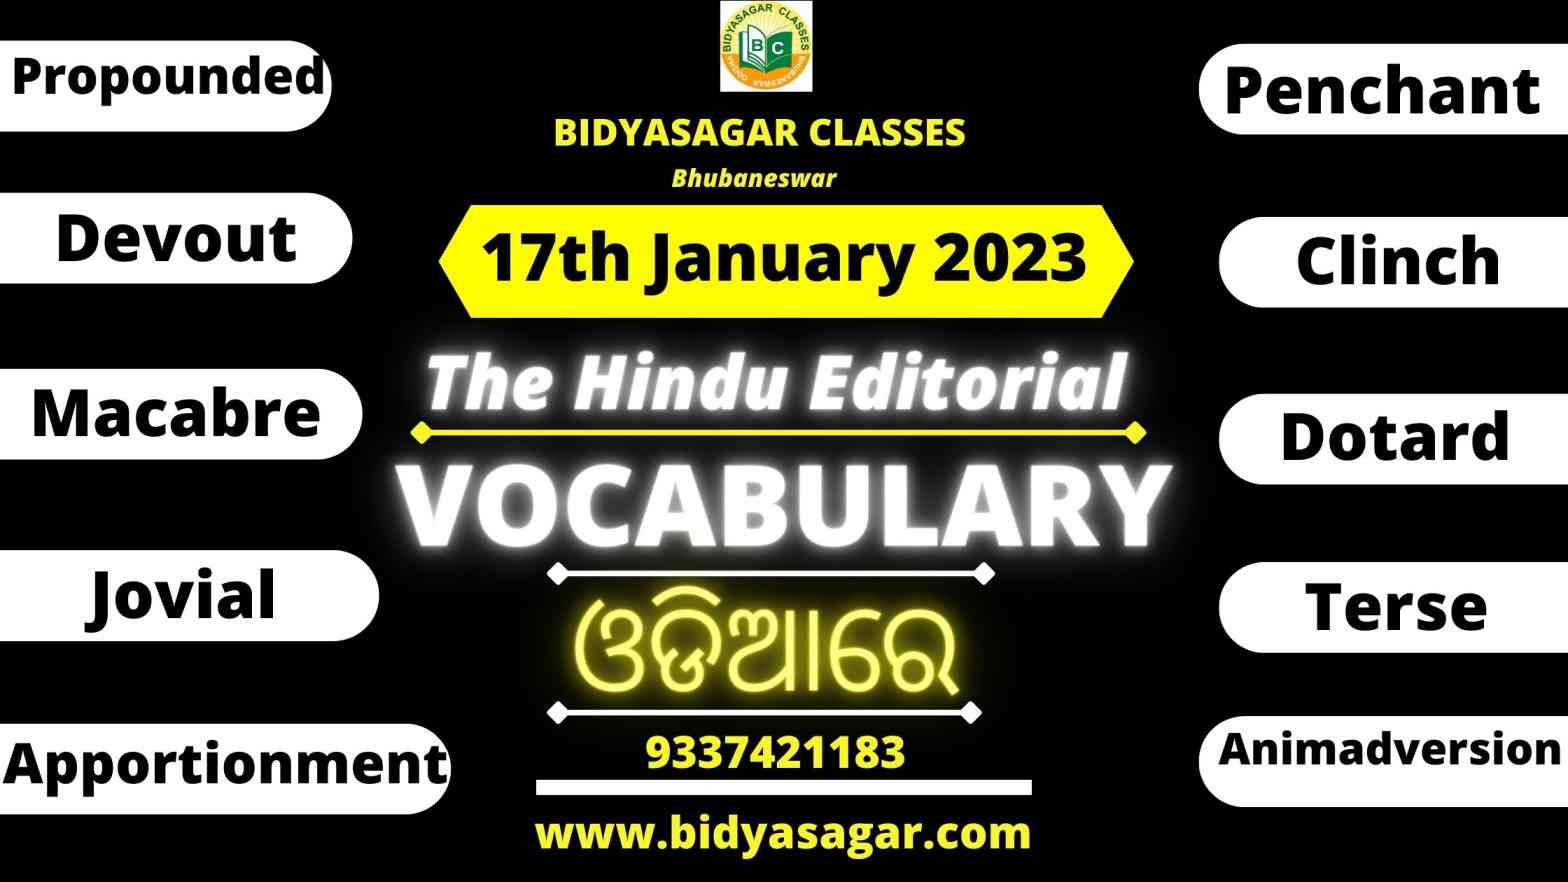 The Hindu Editorial Vocabulary of 17th January 2023